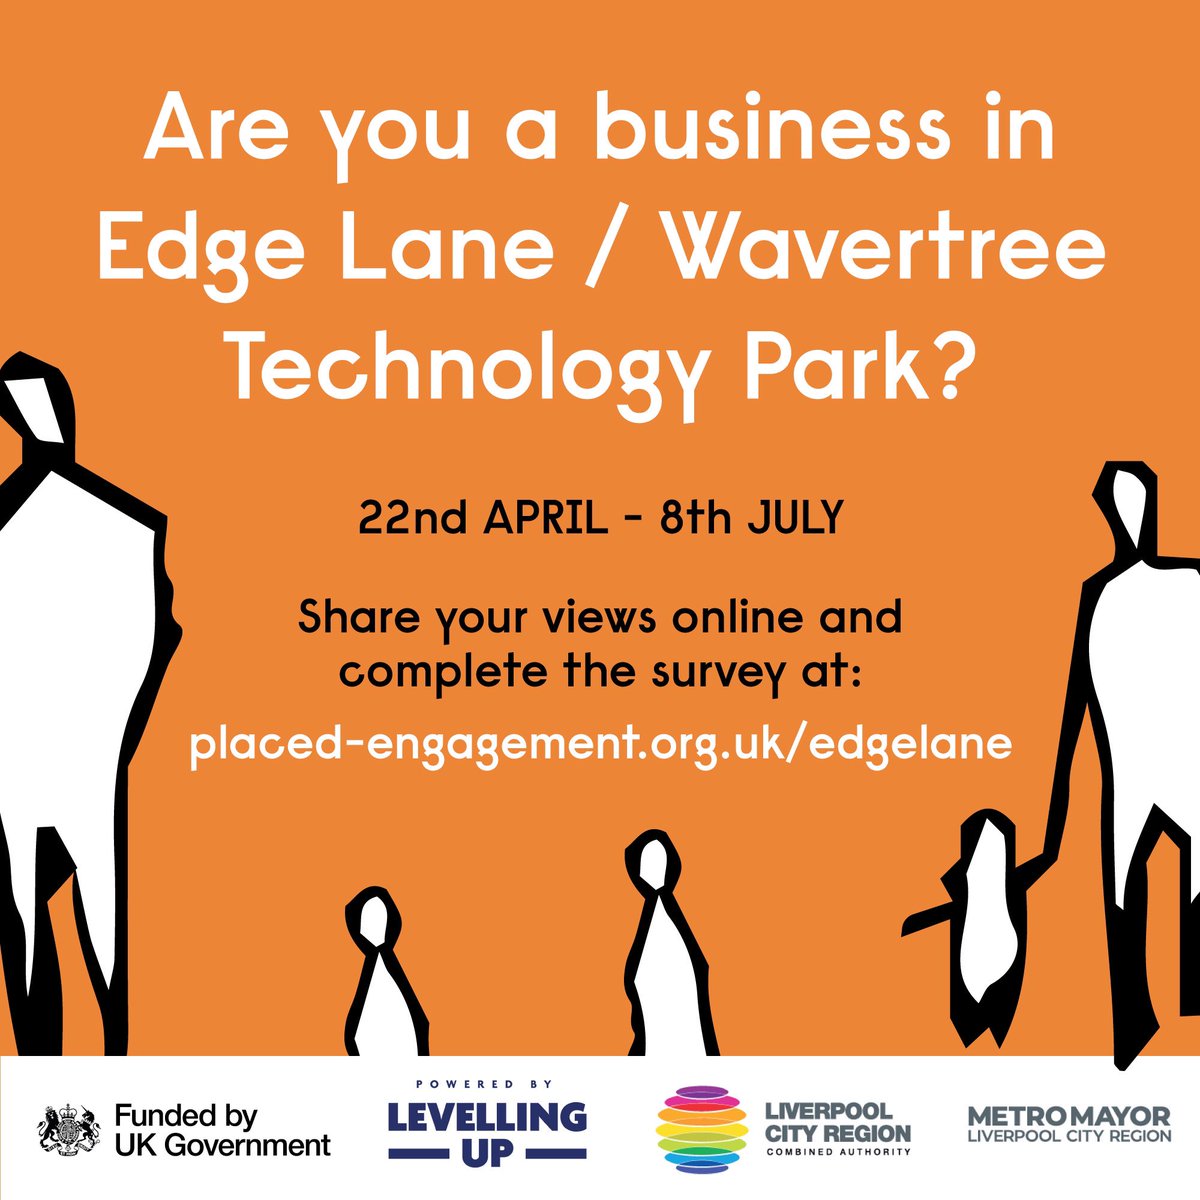 TAKE PART IN OUR QUICK SURVEY! 📣 📍 @lpoolcouncil @LpoolBizGrowth want to work with businesses in Edge Lane and Wavertree Technology Park to help the area thrive. Please head to: 🔗 bit.ly/3ye80Hq to complete our quick survey and share YOUR views online! #PLACED